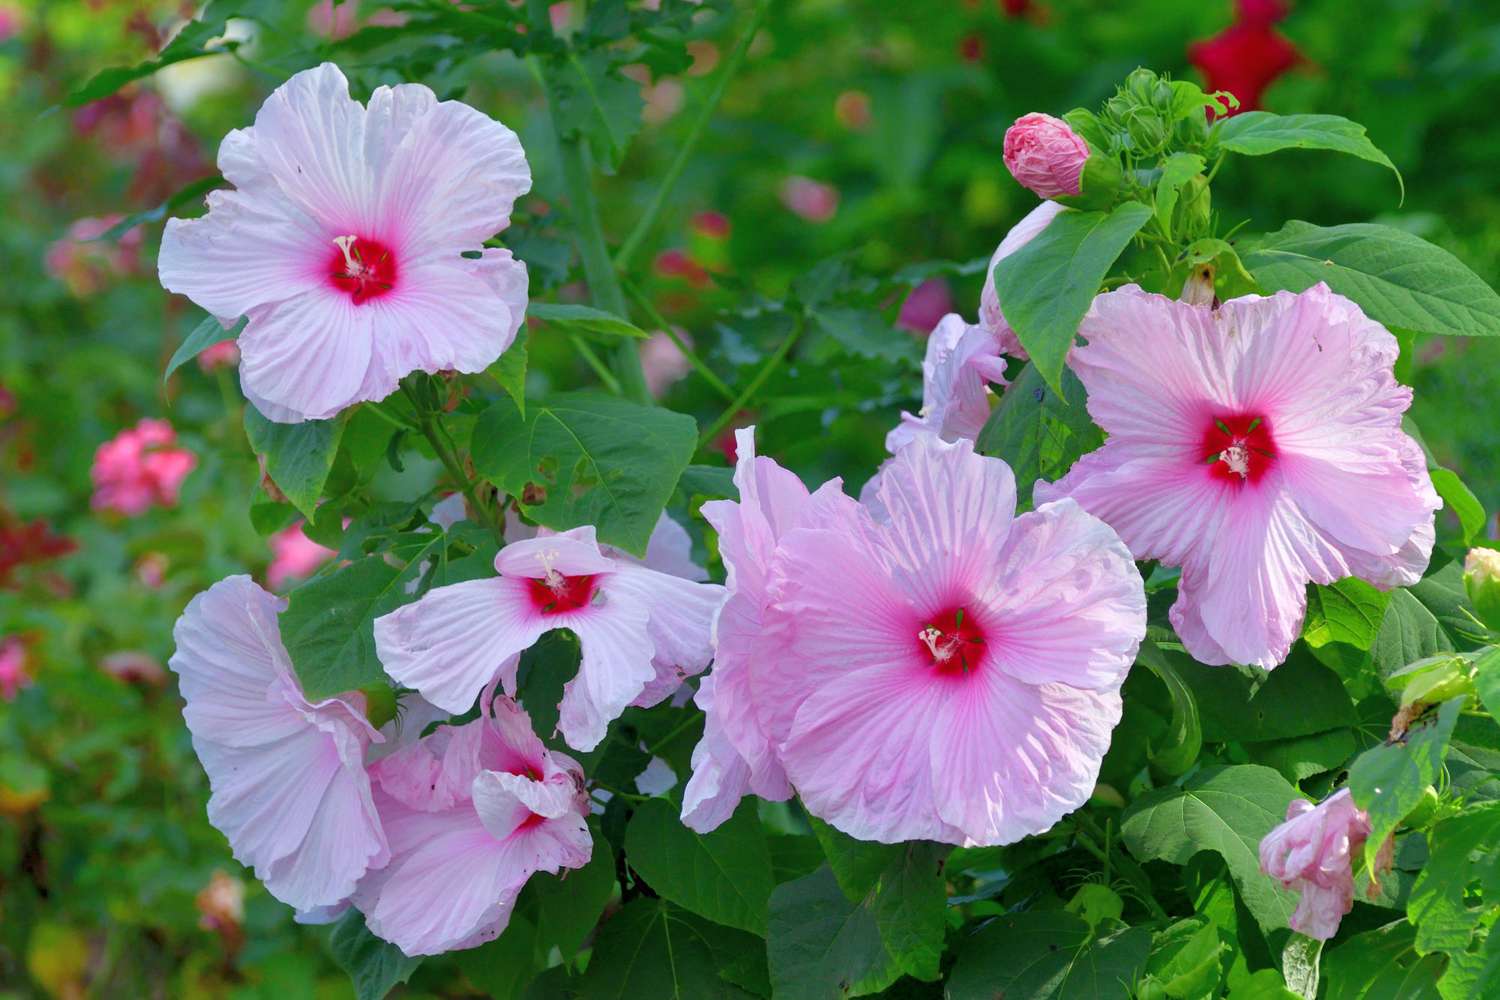 Hibiscus moscheutos, commonly known as hardy hibiscus, swamp mallow or rose mallow